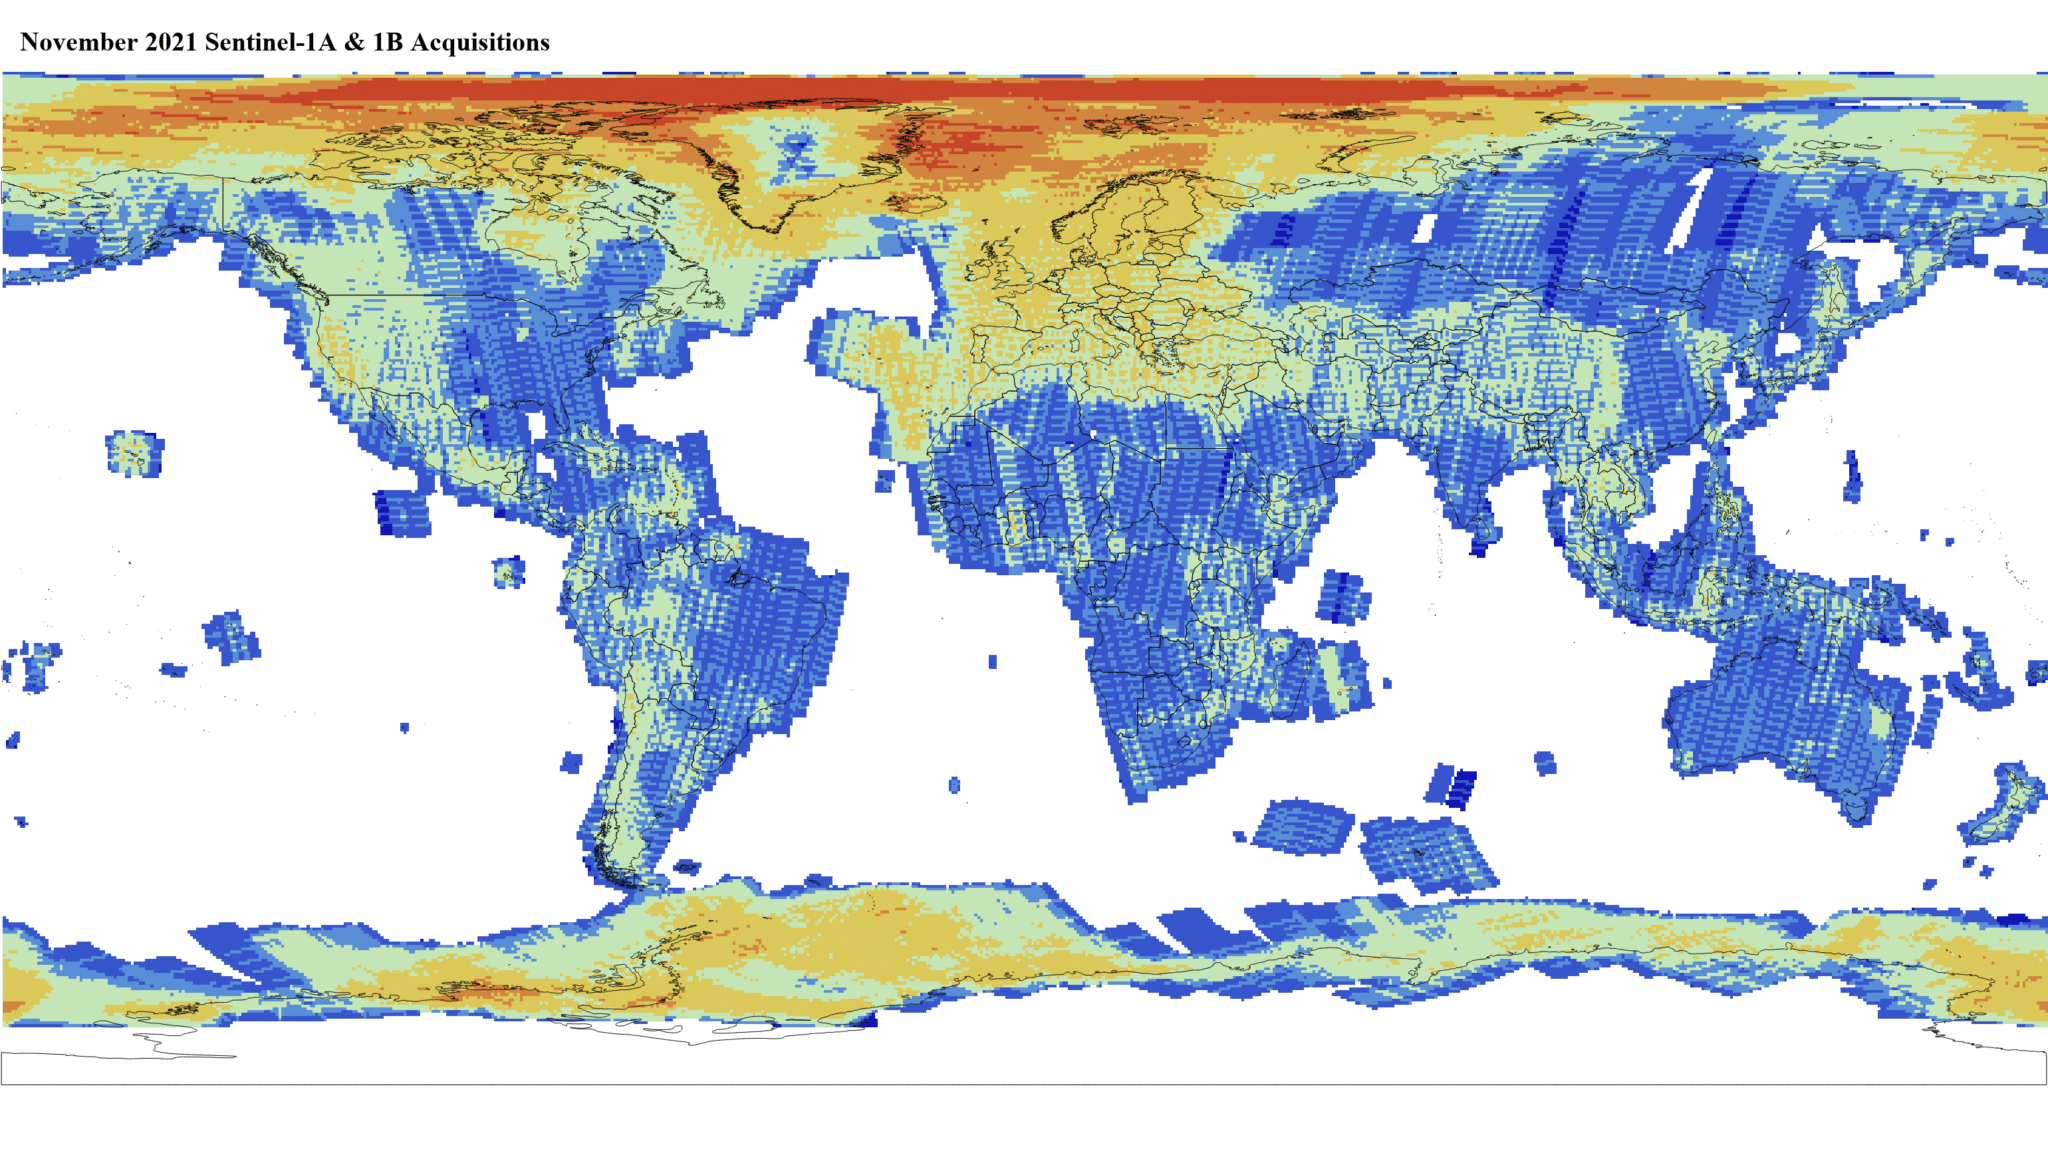 Heat map of Sentinel-1A and -1B GRD global acquisitions November 2021